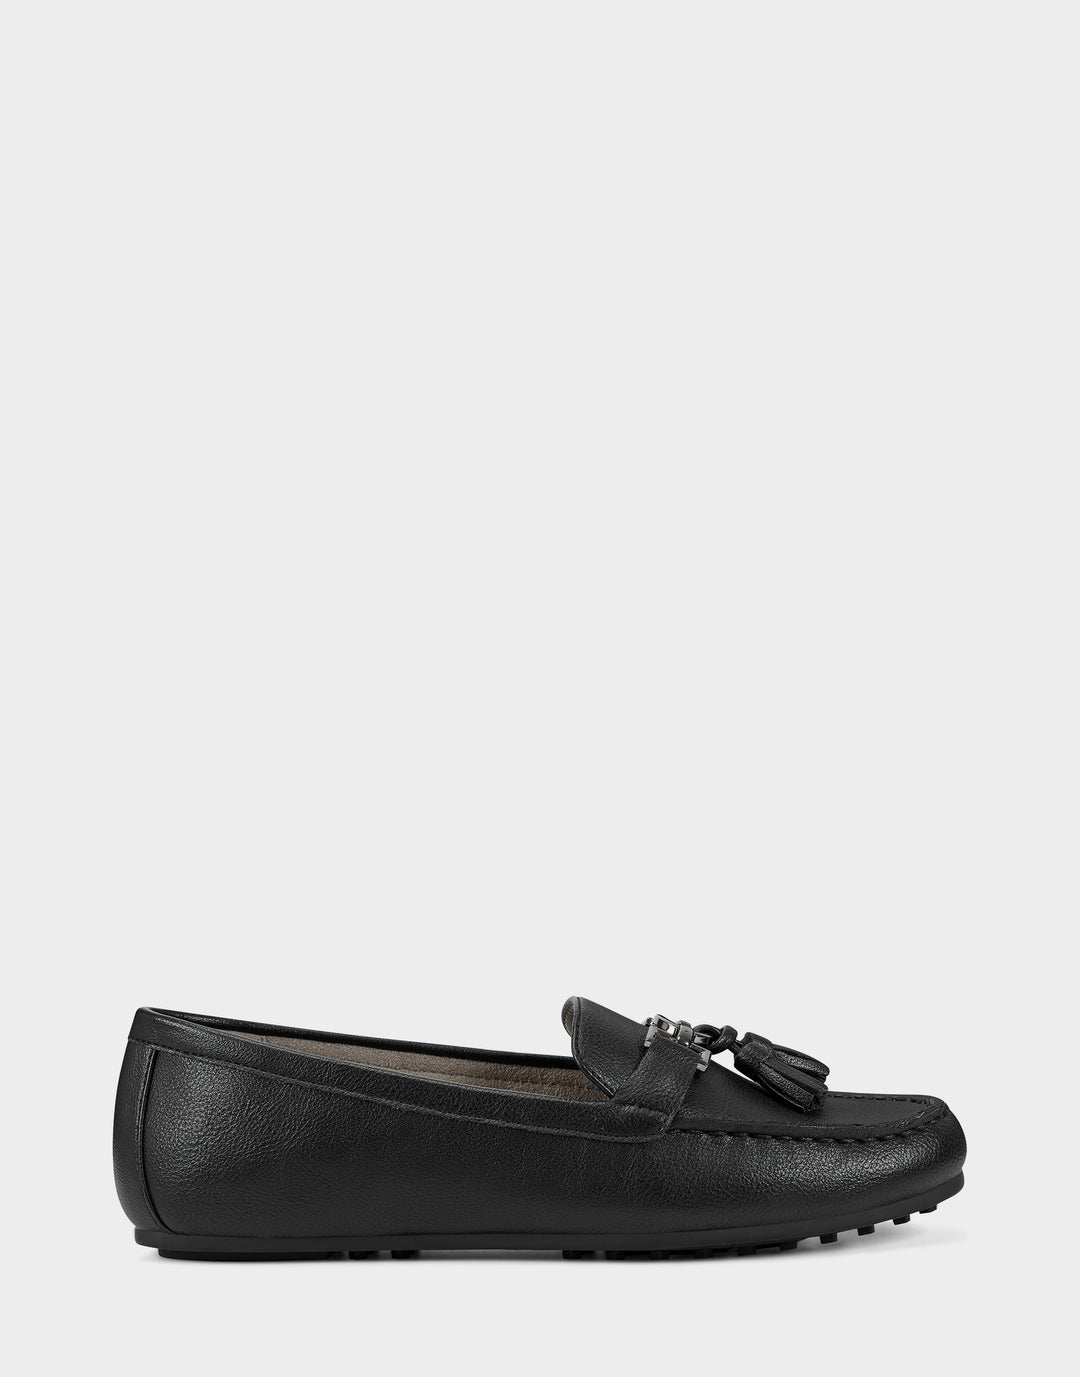 Deanna - comfortable women's loafers in black